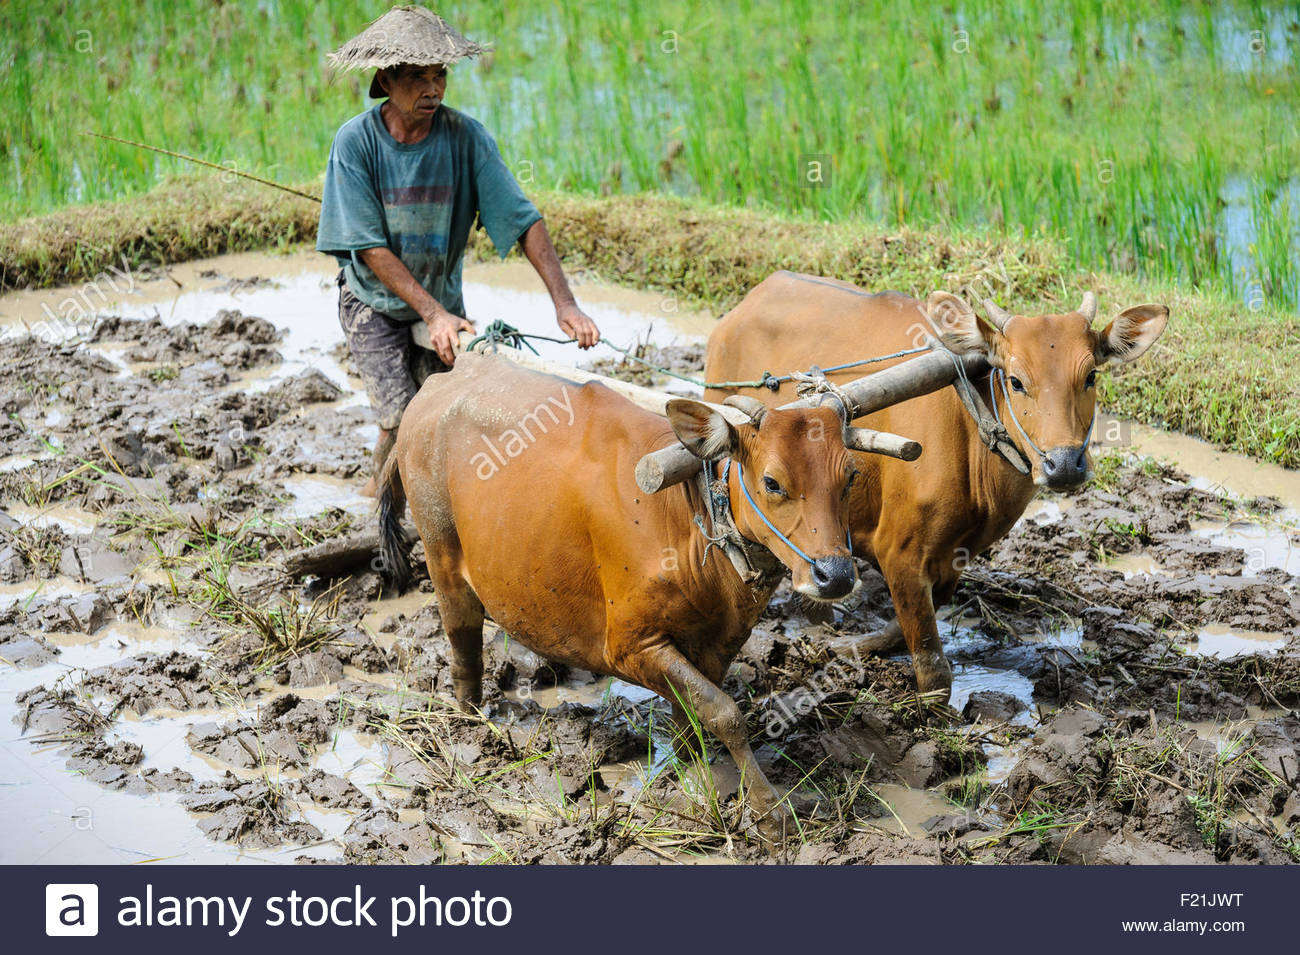 a-farmer-using-oxen-to-prepare-a-paddy-field-for-rice-planting-bali-F21JWT.jpg